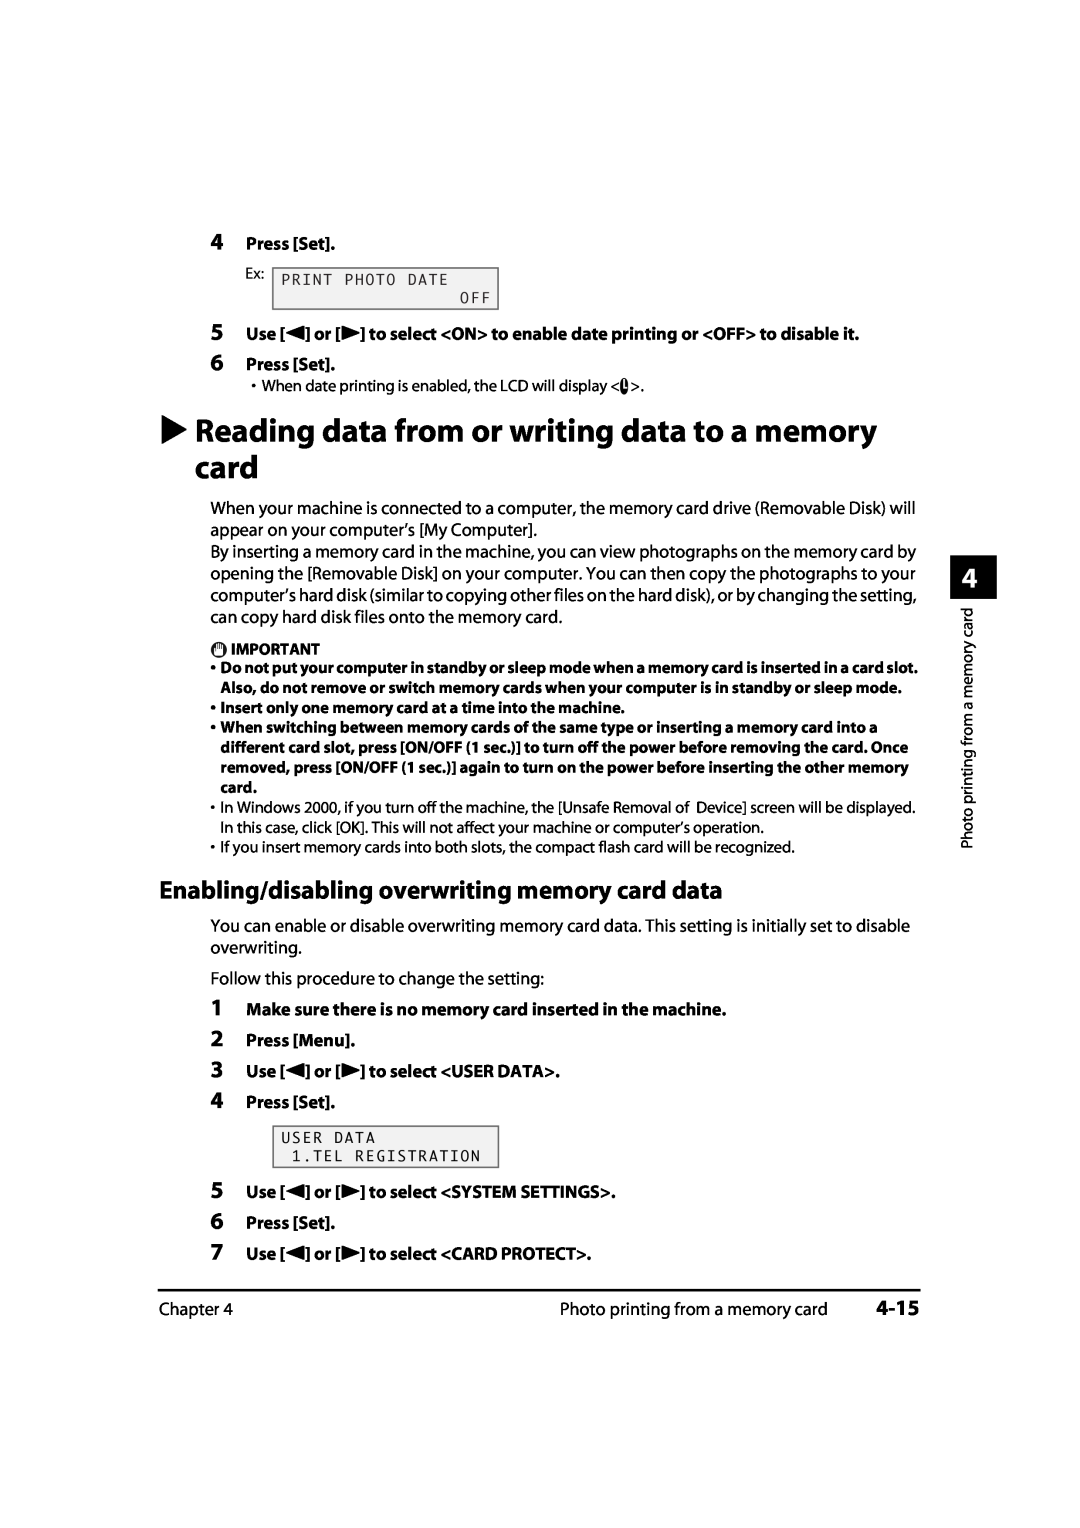 Canon MP700 Reading data from or writing data to a memory card, Enabling/disabling overwriting memory card data, 4-15 